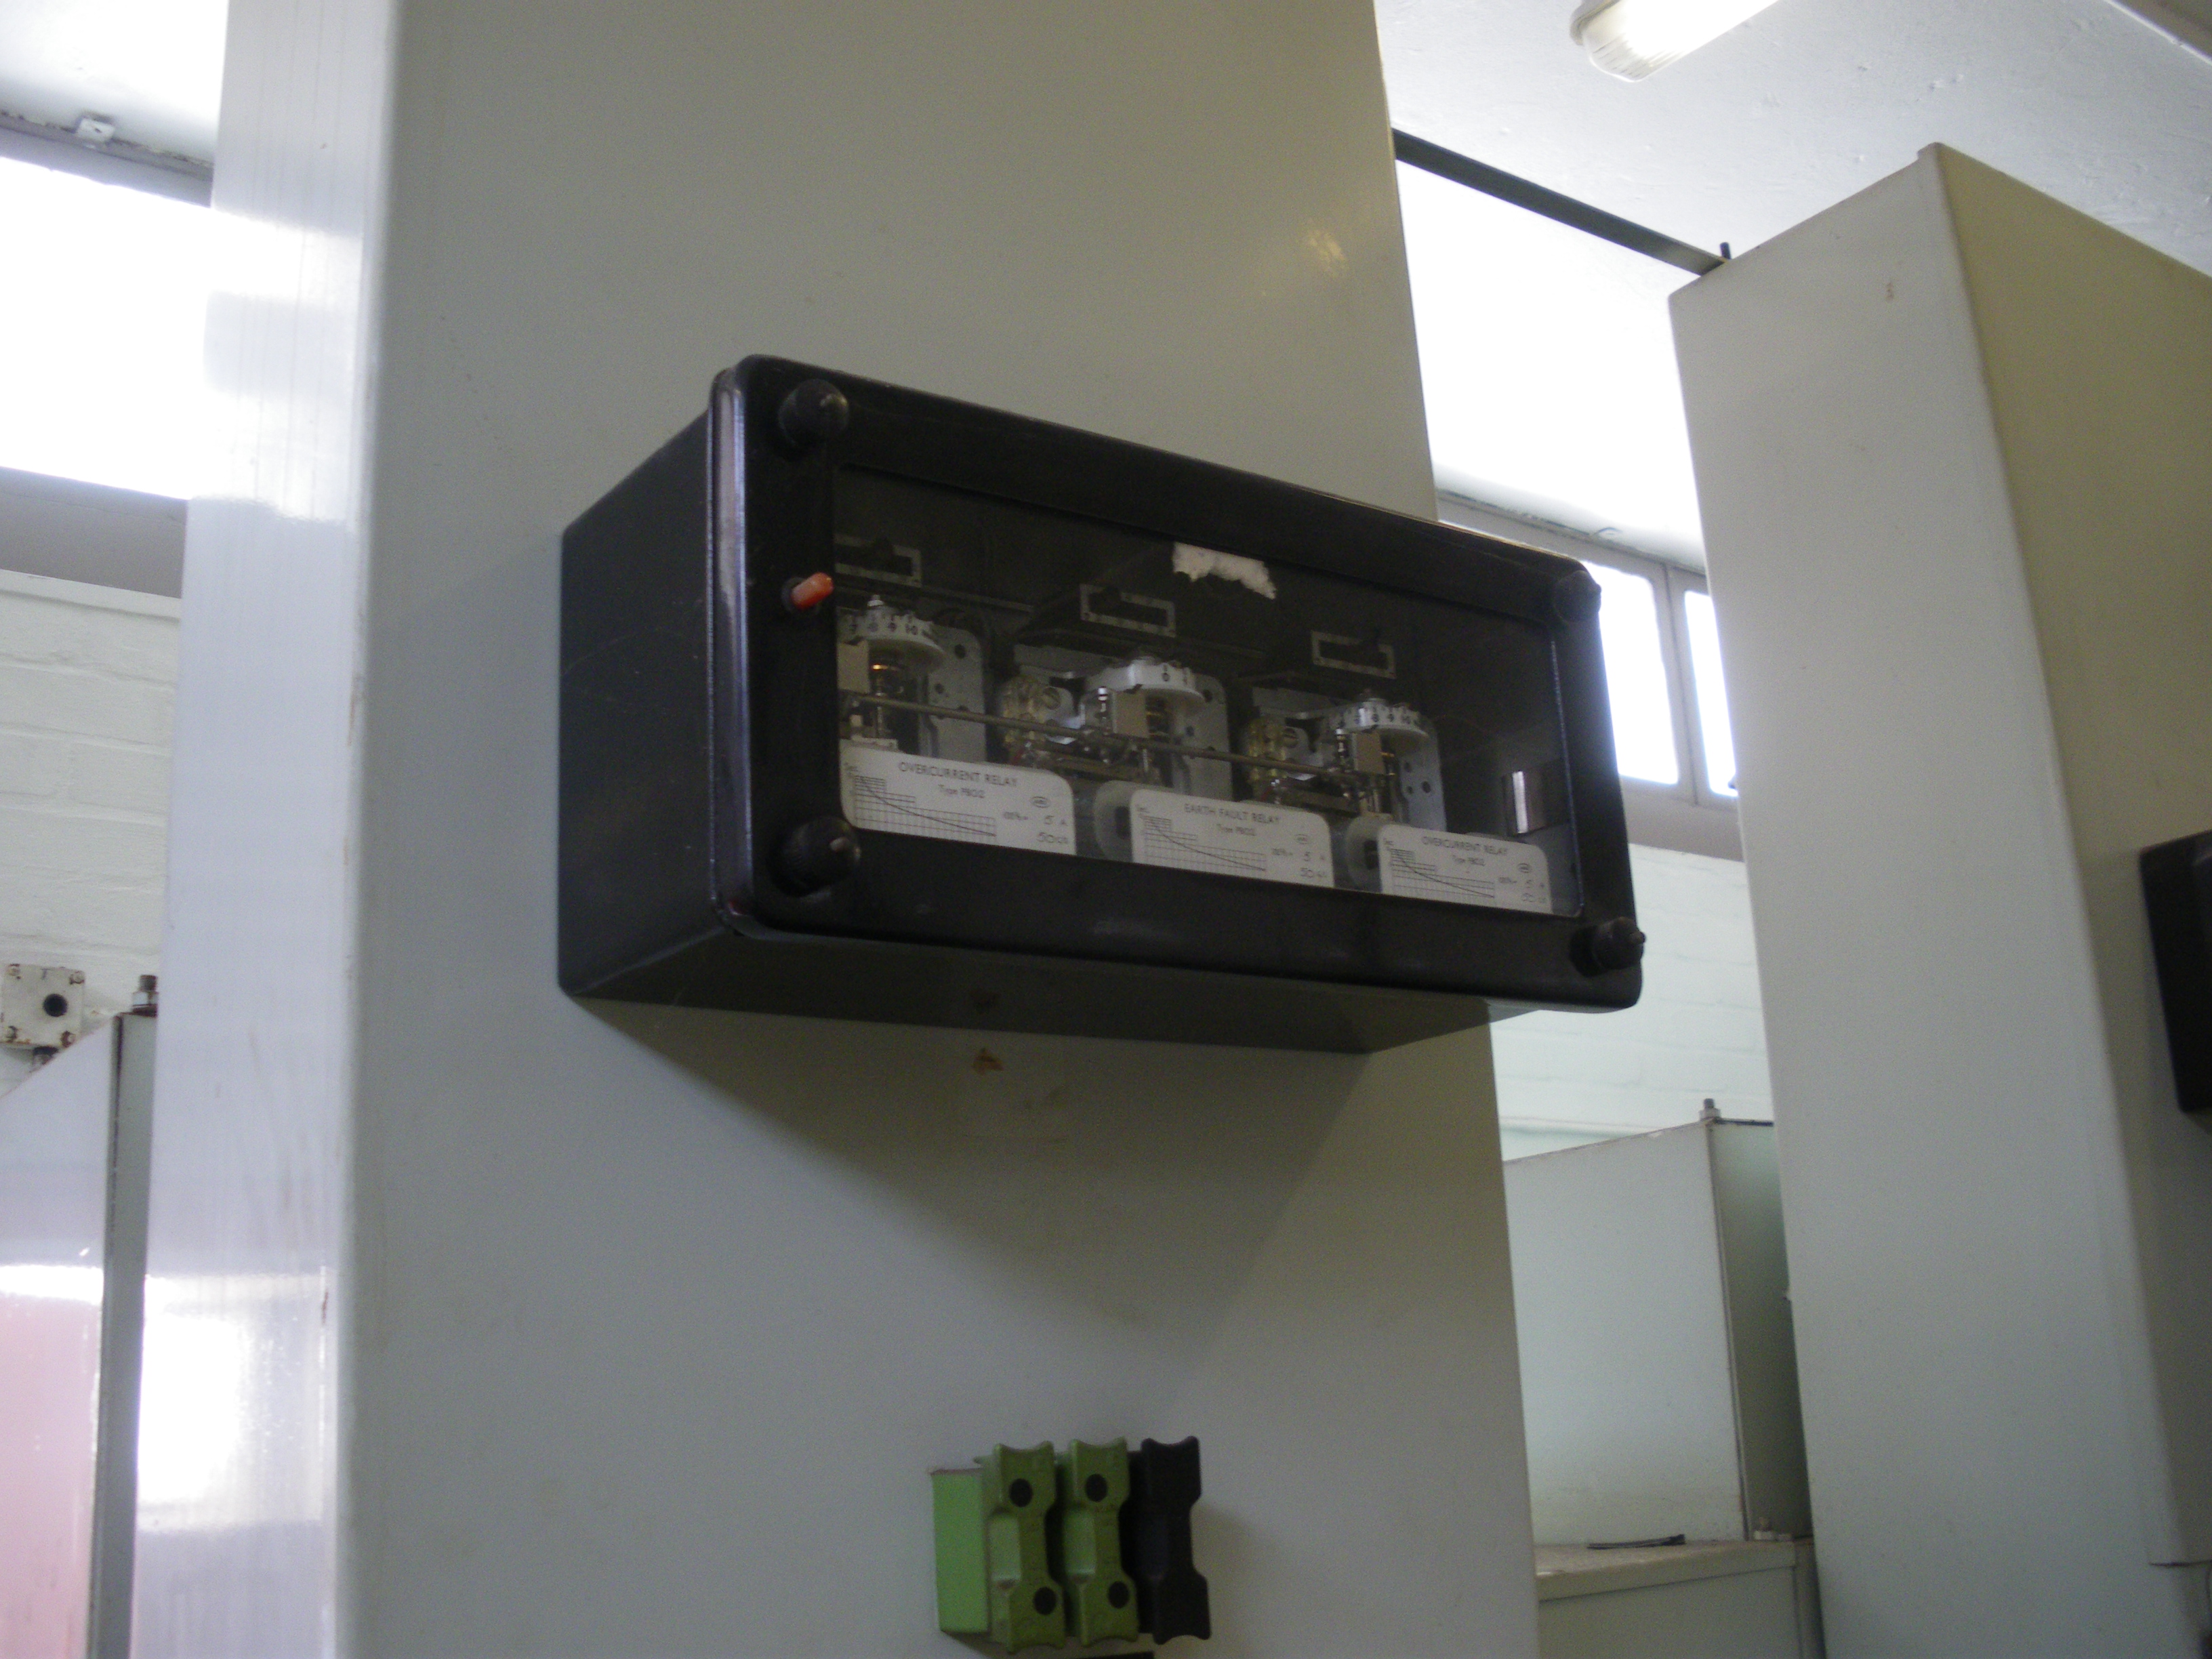 Substation - switchgear for a chiller